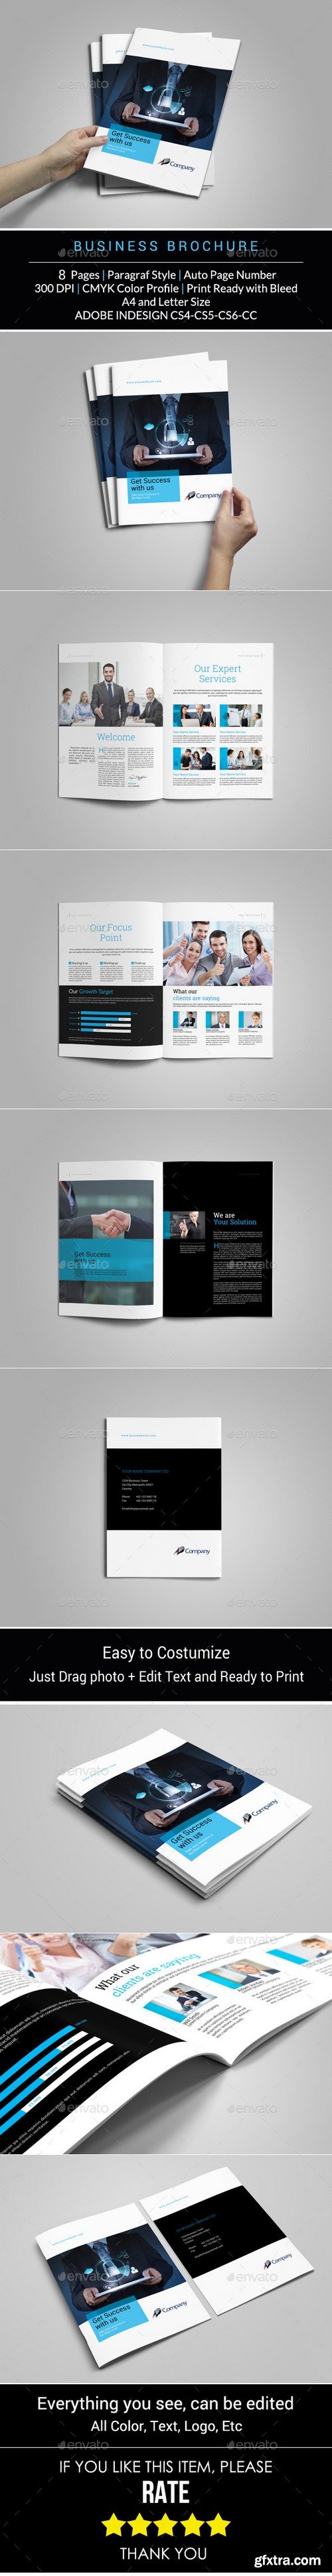 Graphicriver - Business Brochure Template 12625097